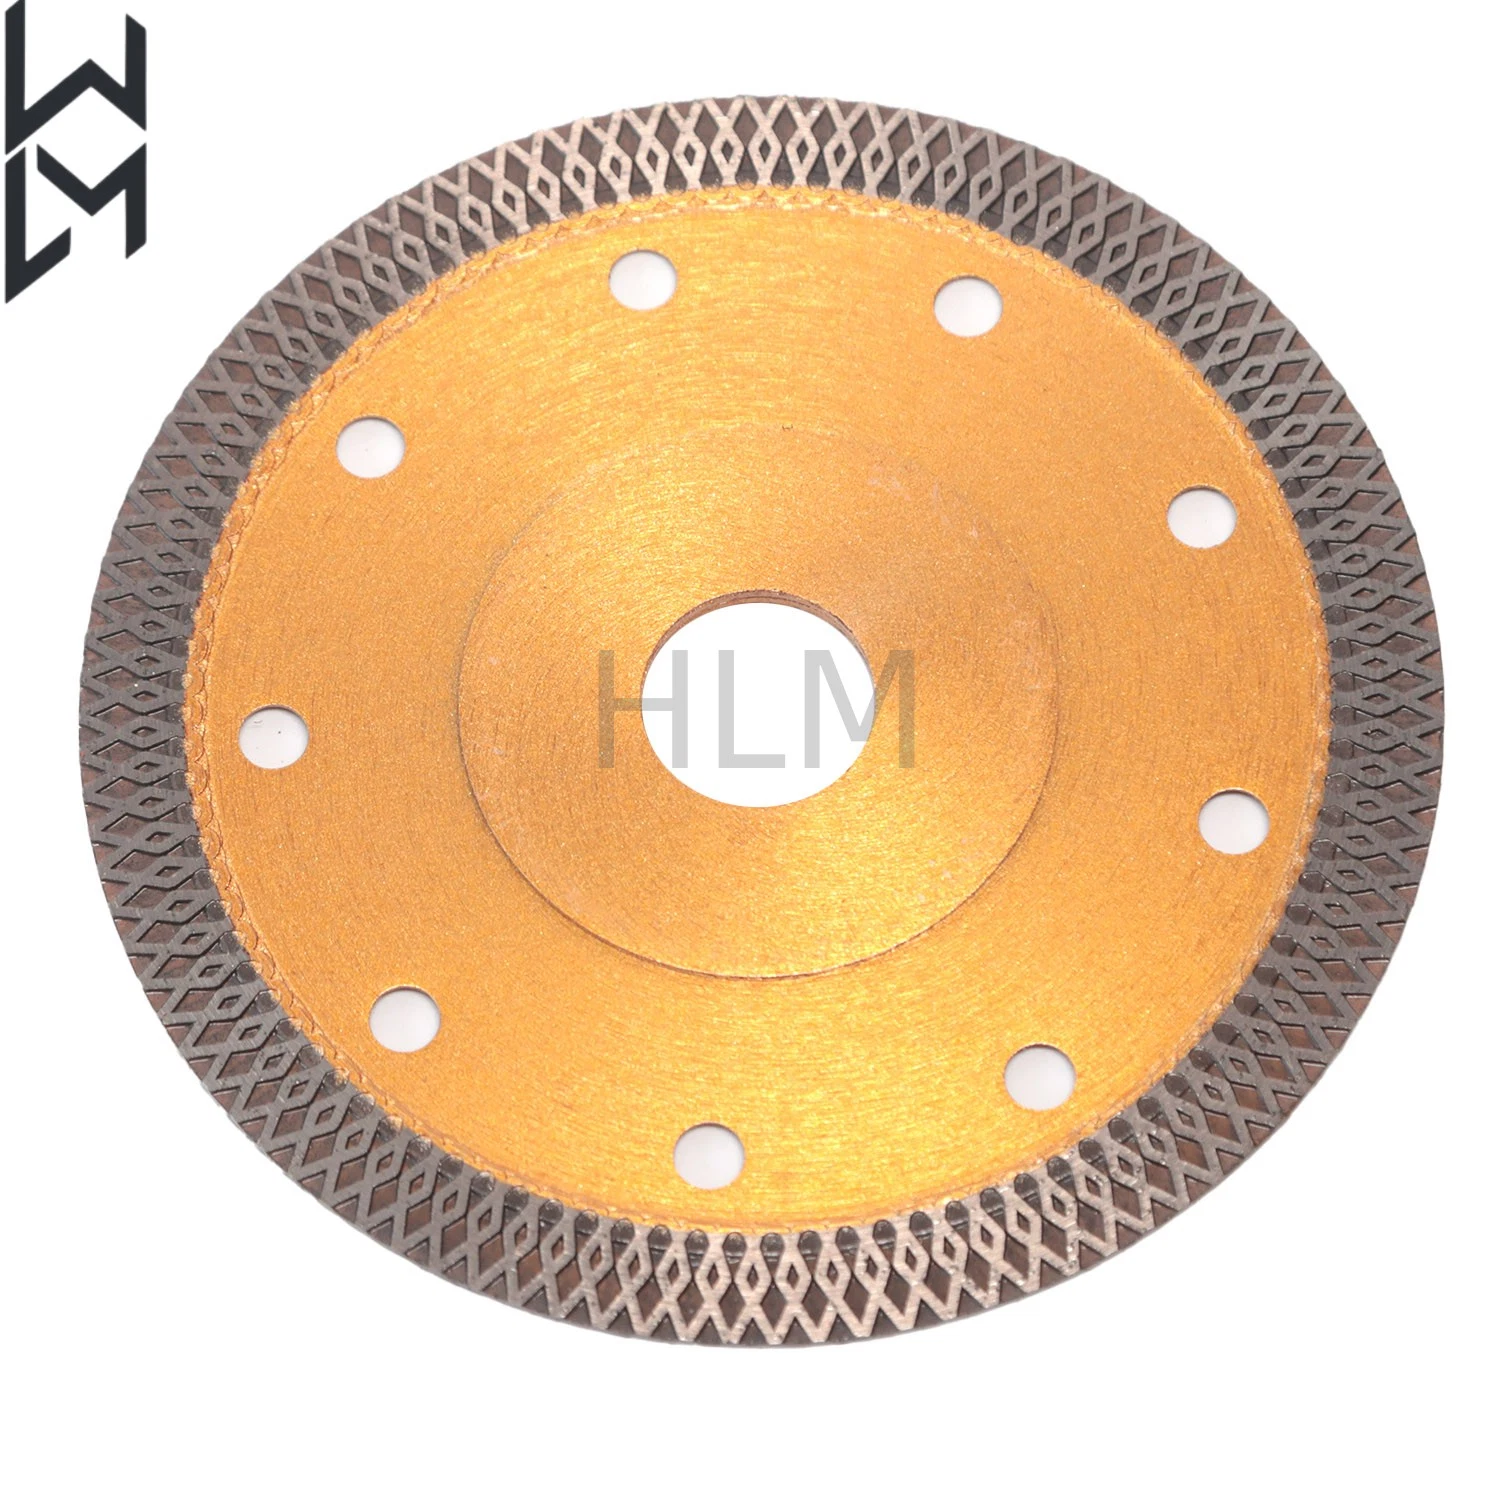 Mesh Head Saw Blade Cut Stone with Water